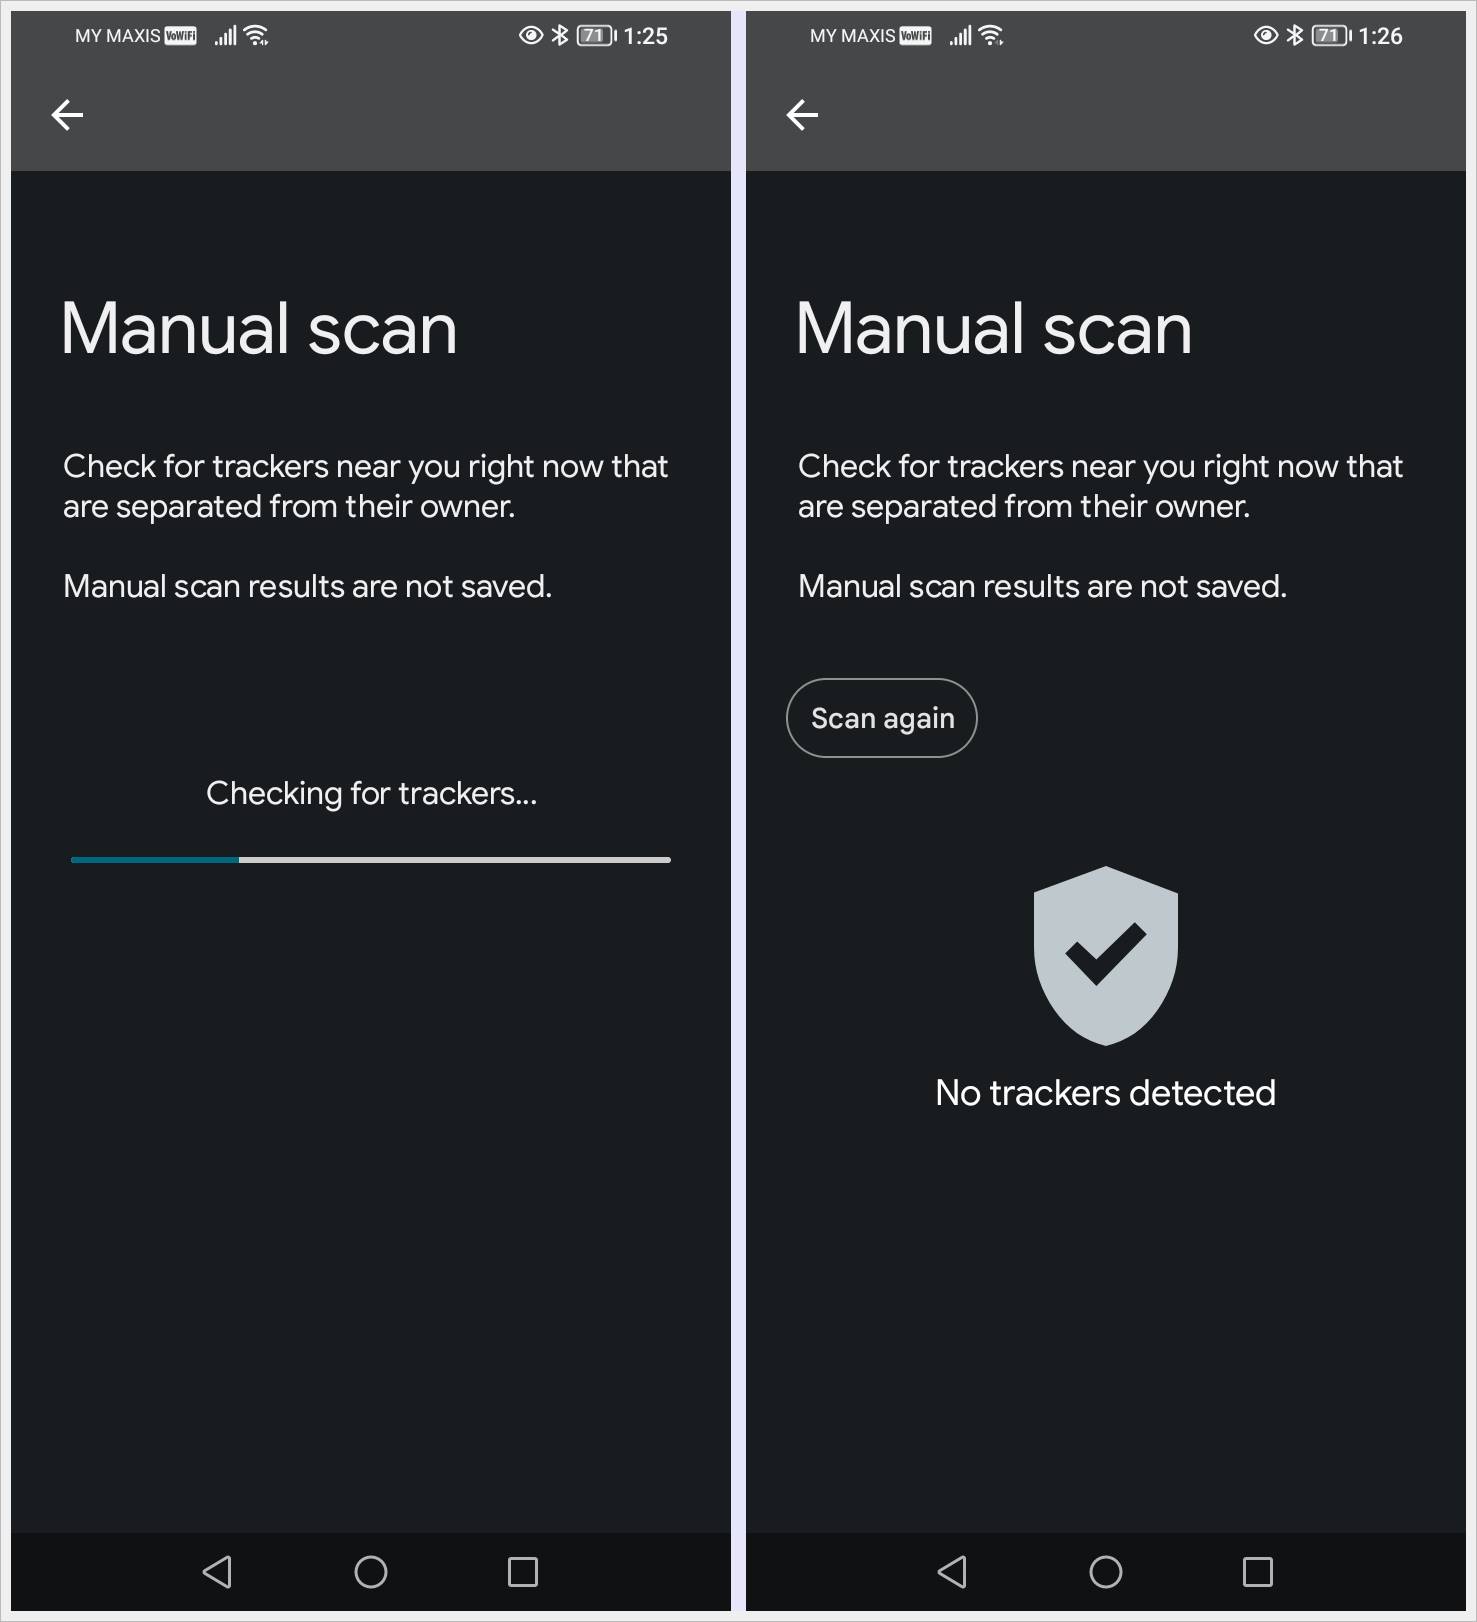 How to Track Unknown Apple AirTags With an Android: This image displays two screenshots of Unknown Tracker Alerts Manual Scan – one showing a manual scan in progress and the other indicating a completed scan.